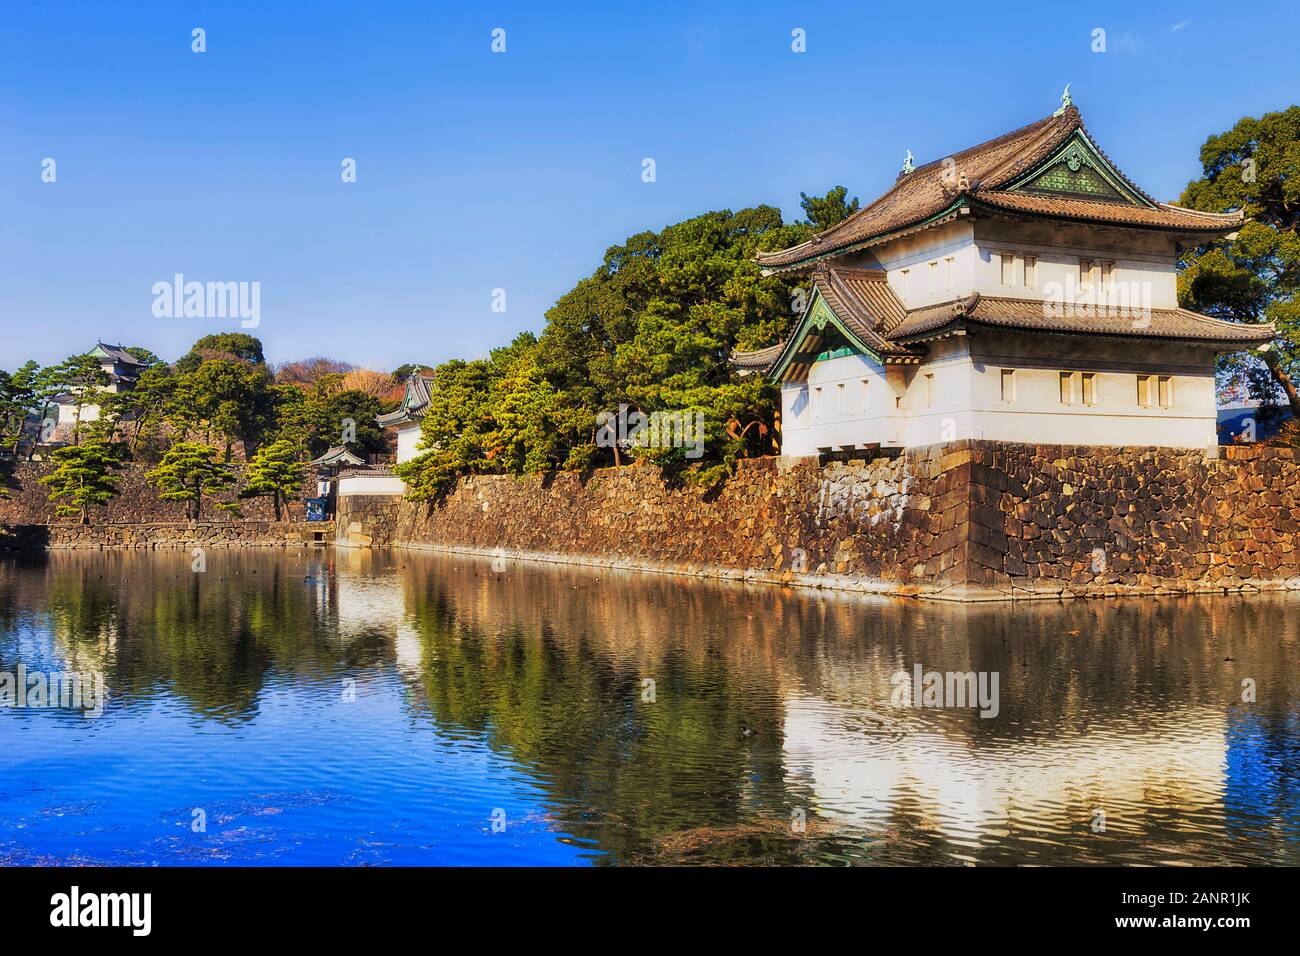 The imperial palace and Eastern garden in Tokyo, Japan. White corner tower on top of stone wall reflecting in water moat. Stock Photo